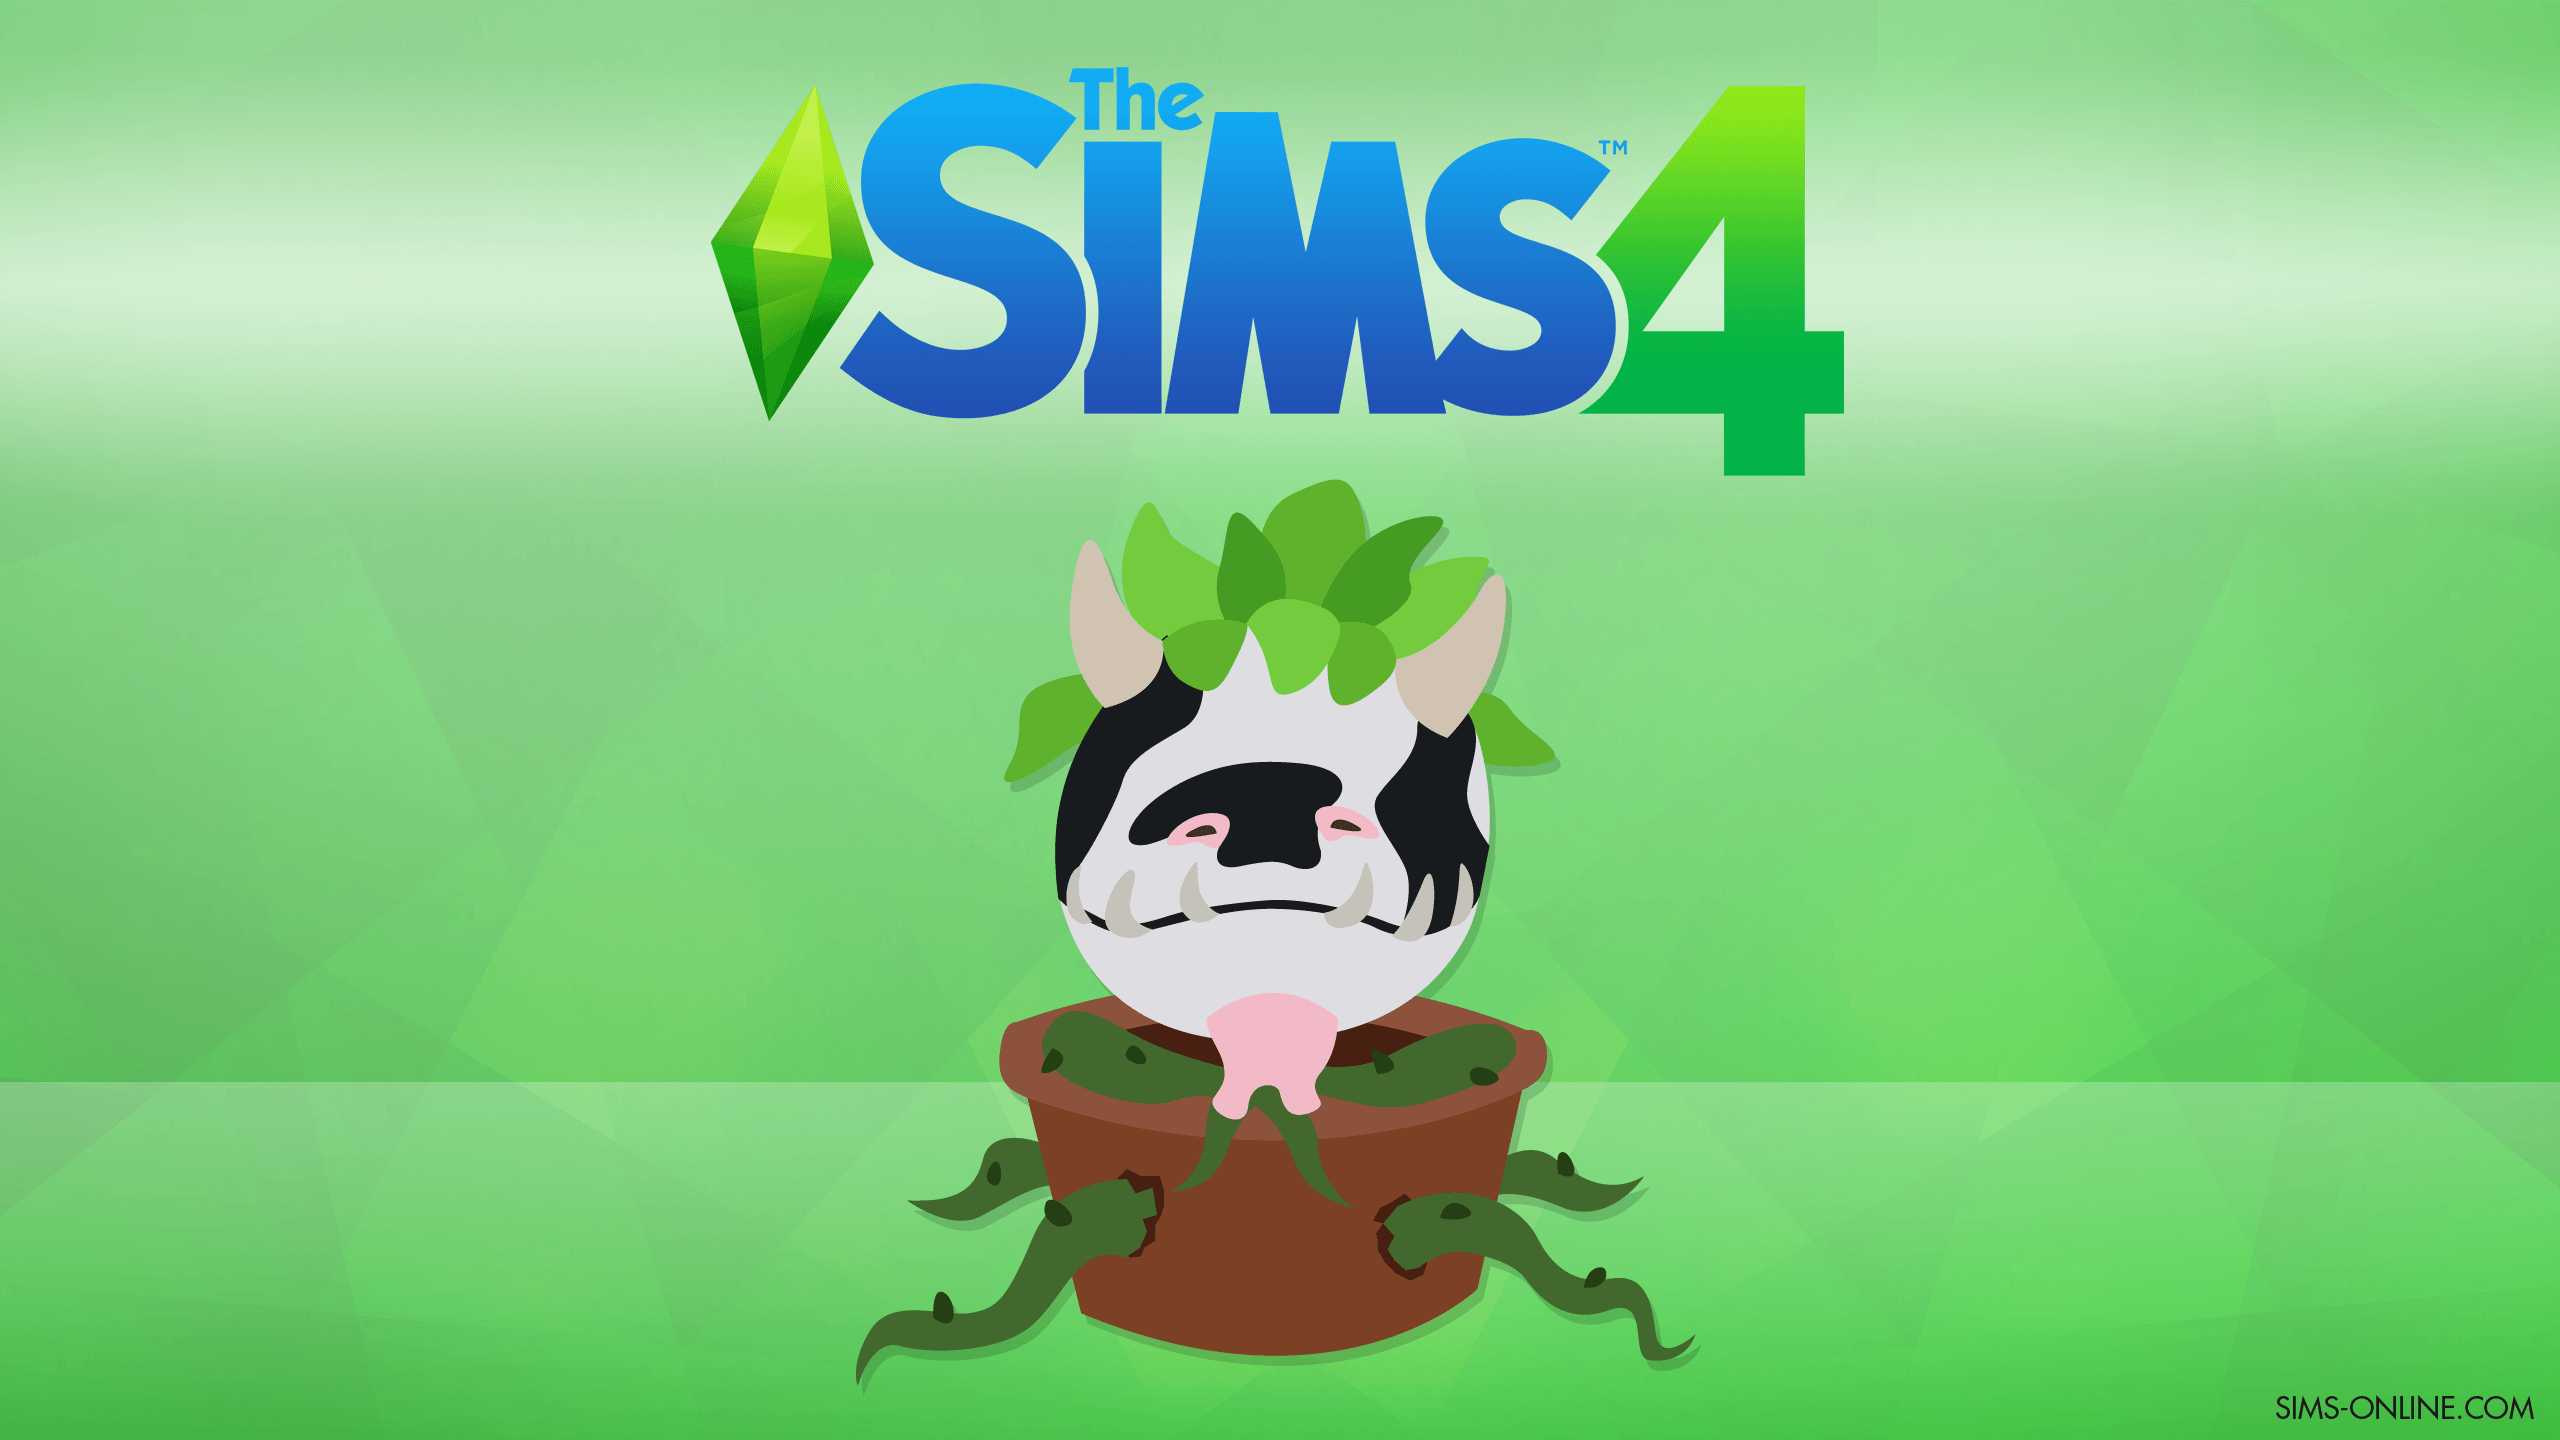 Sims 4 Wallpaper Free Sims 4 Background